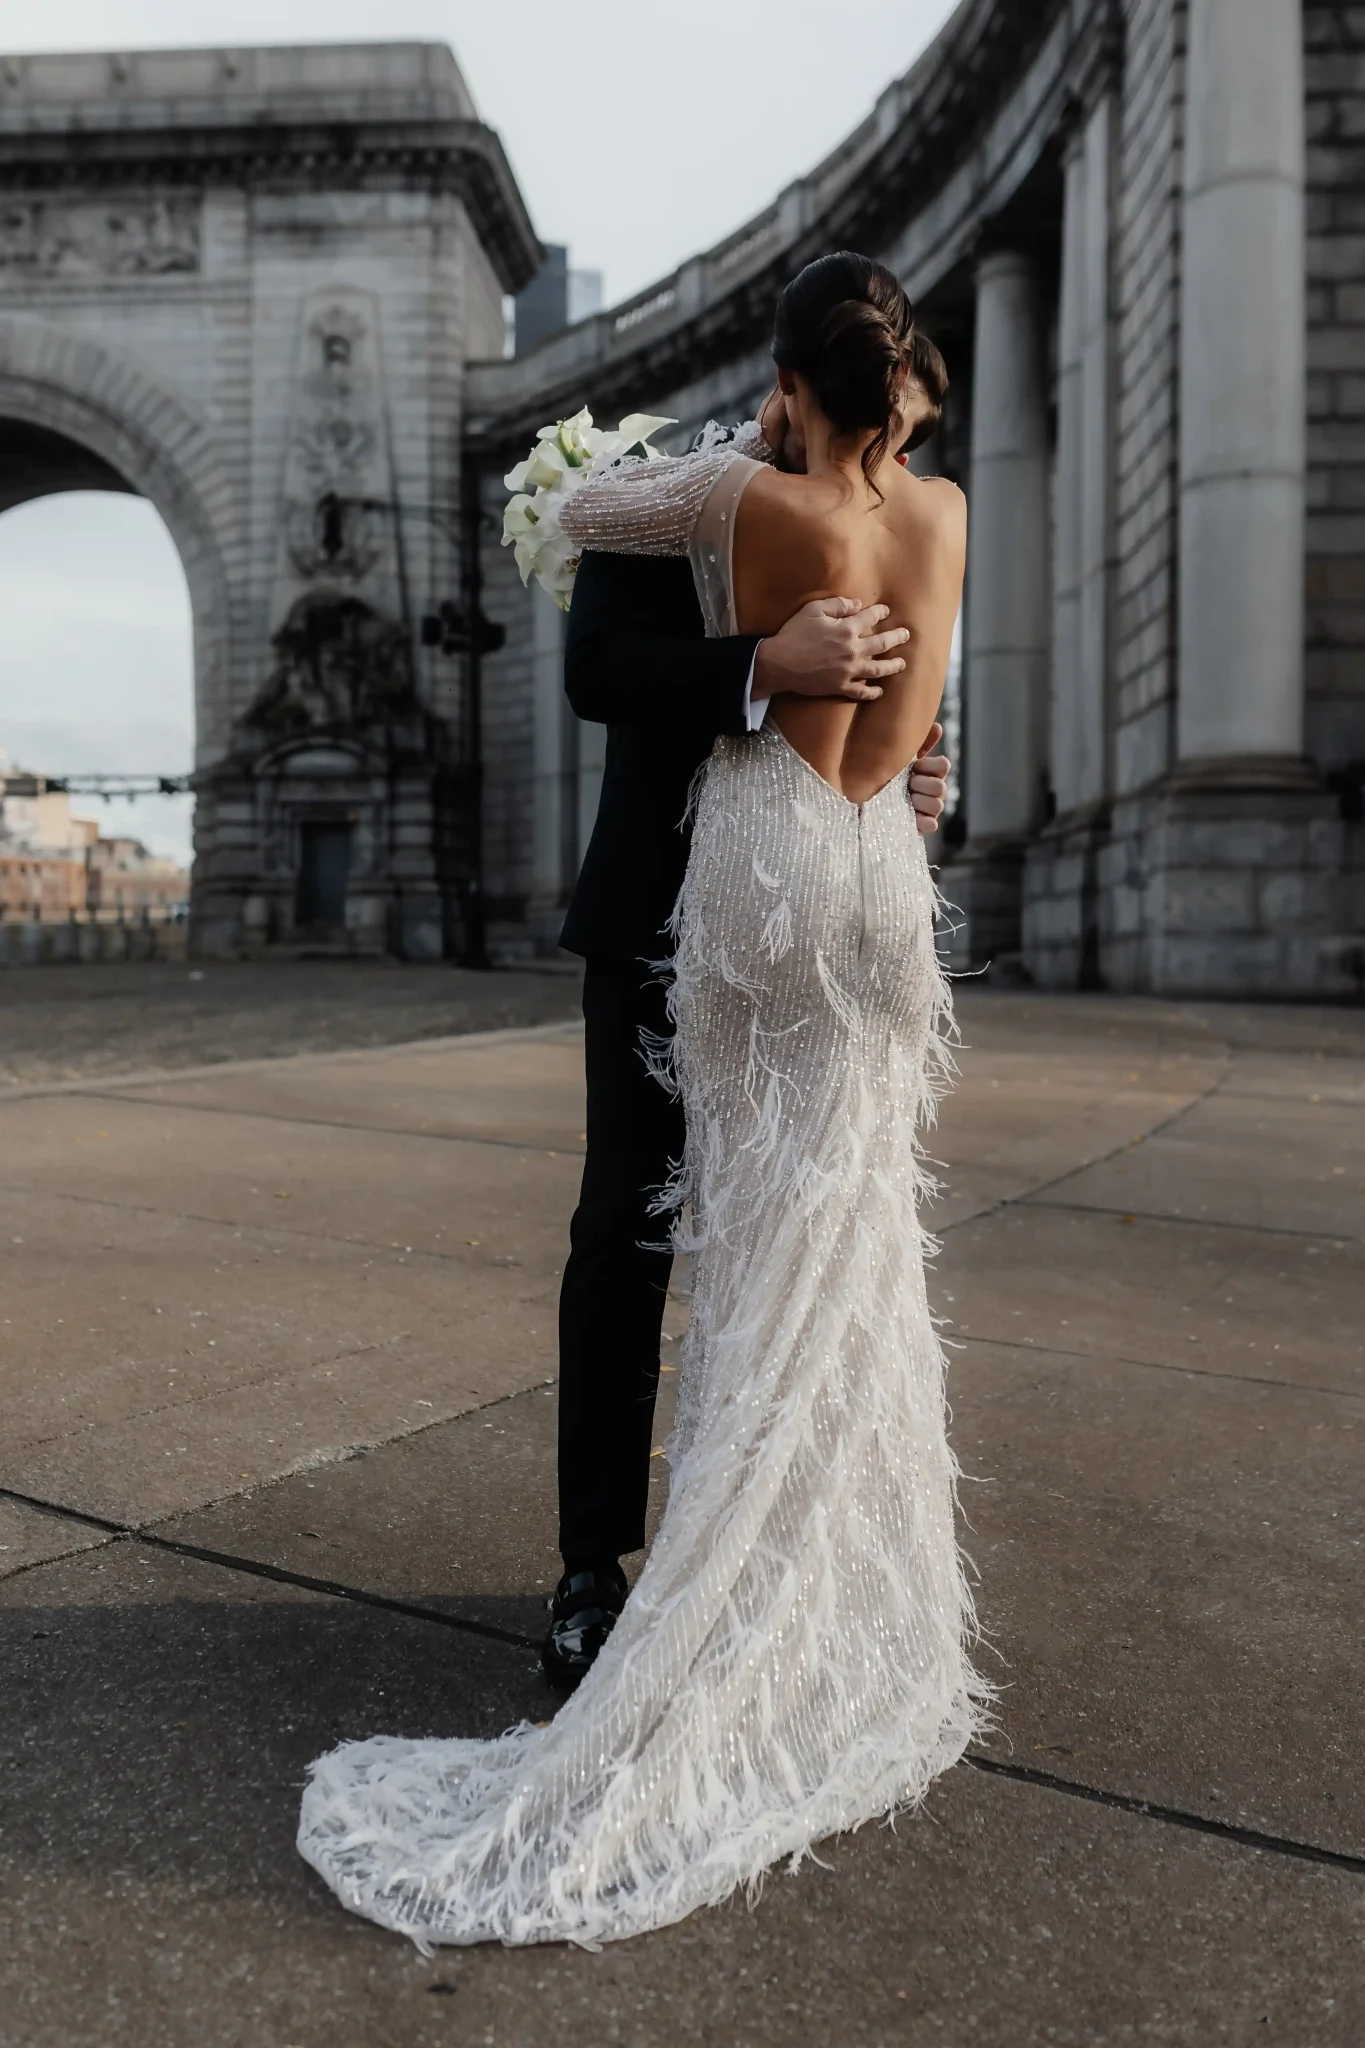 A bride and groom hugging in front of an arch.